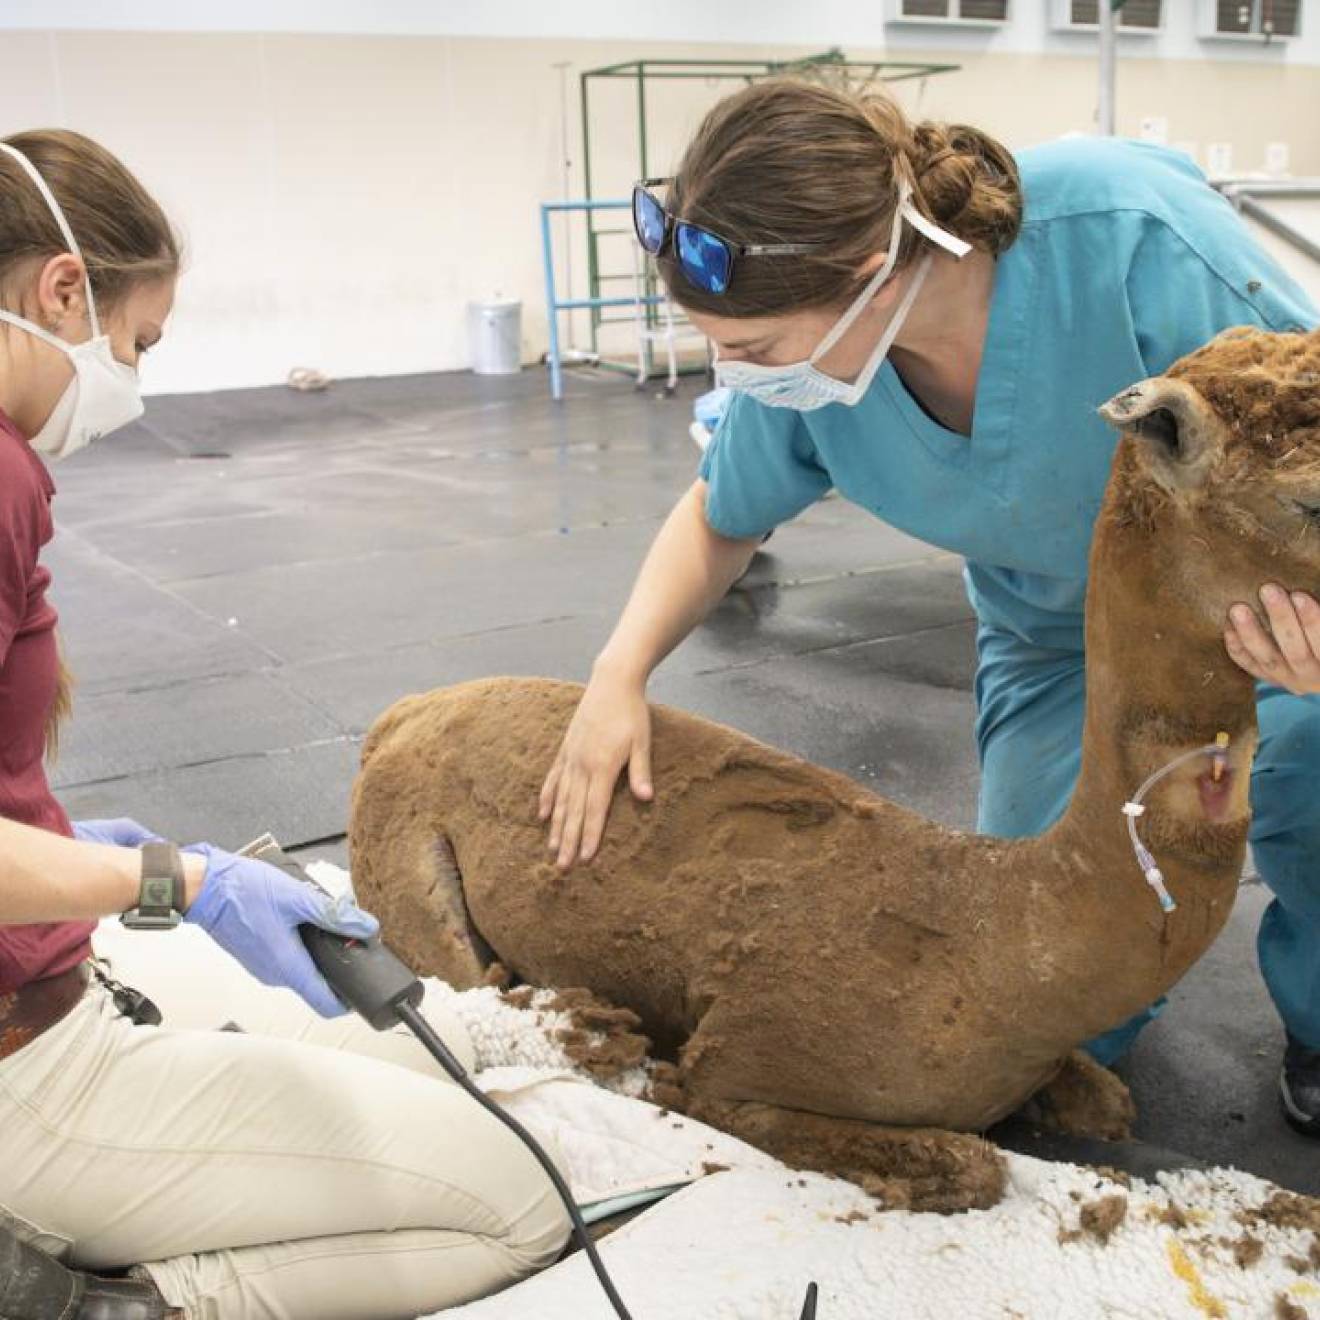 Two women in scrubs administer care while shaving an alpaca after a wildfire